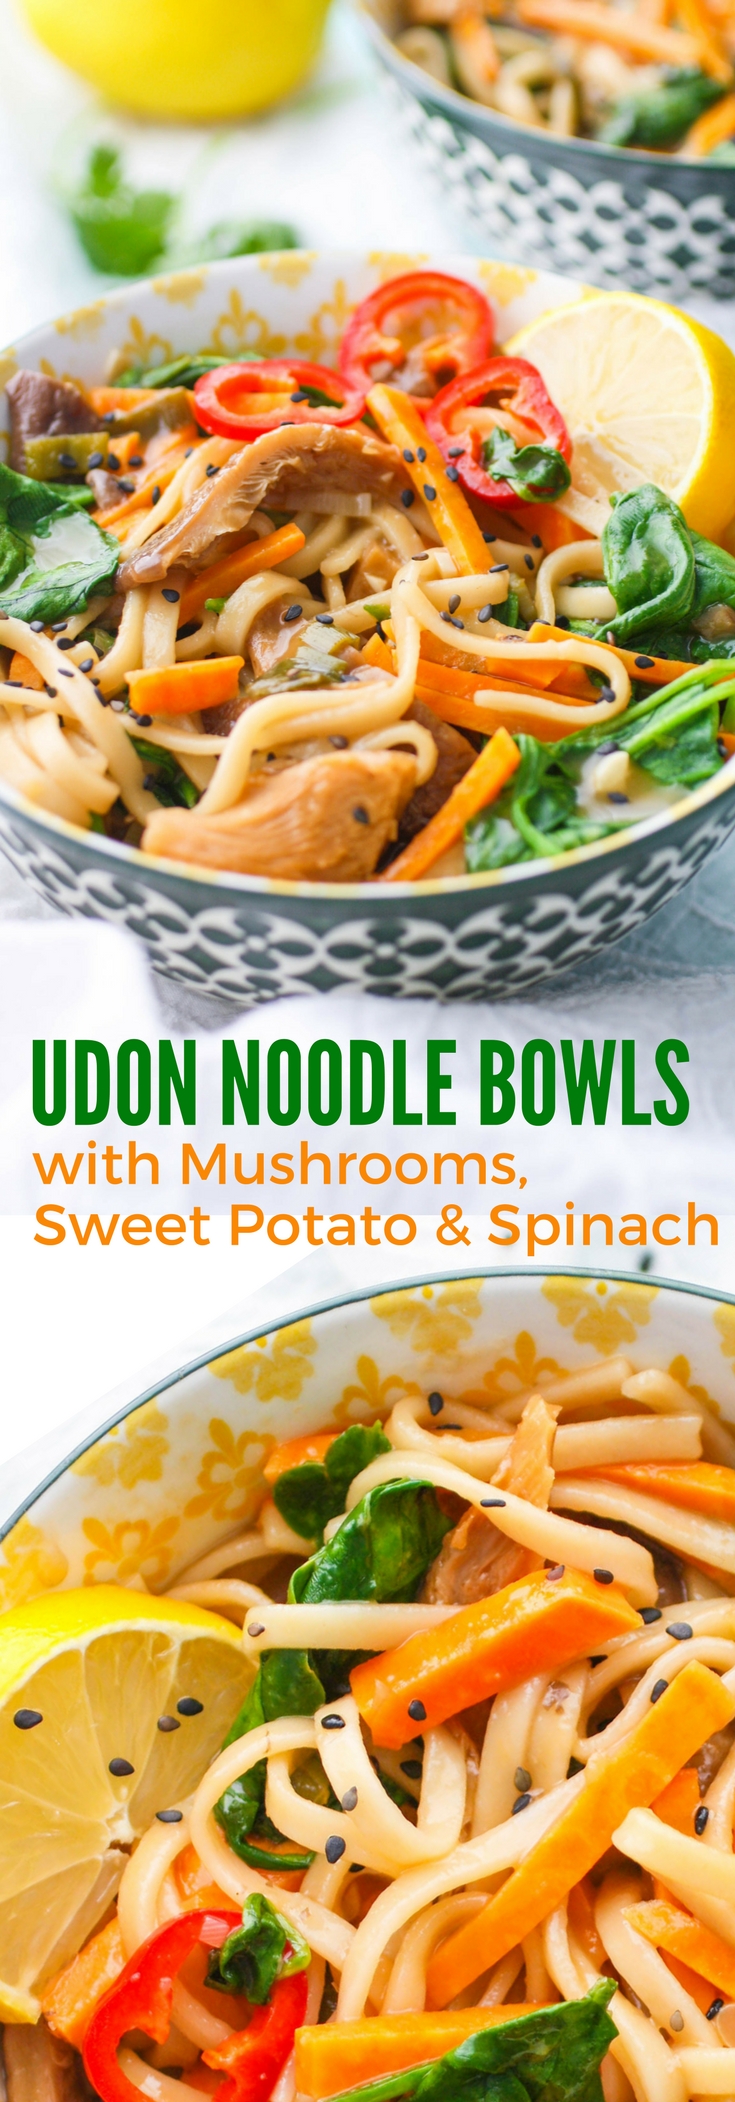 Udon Noodle Bowls with Mushroom, Sweet Potato & Spinach make a wonderful meal any night of the week. You'll love these Udon Noodle Bowls with Mushroom, Sweet Potato & Spinach. 